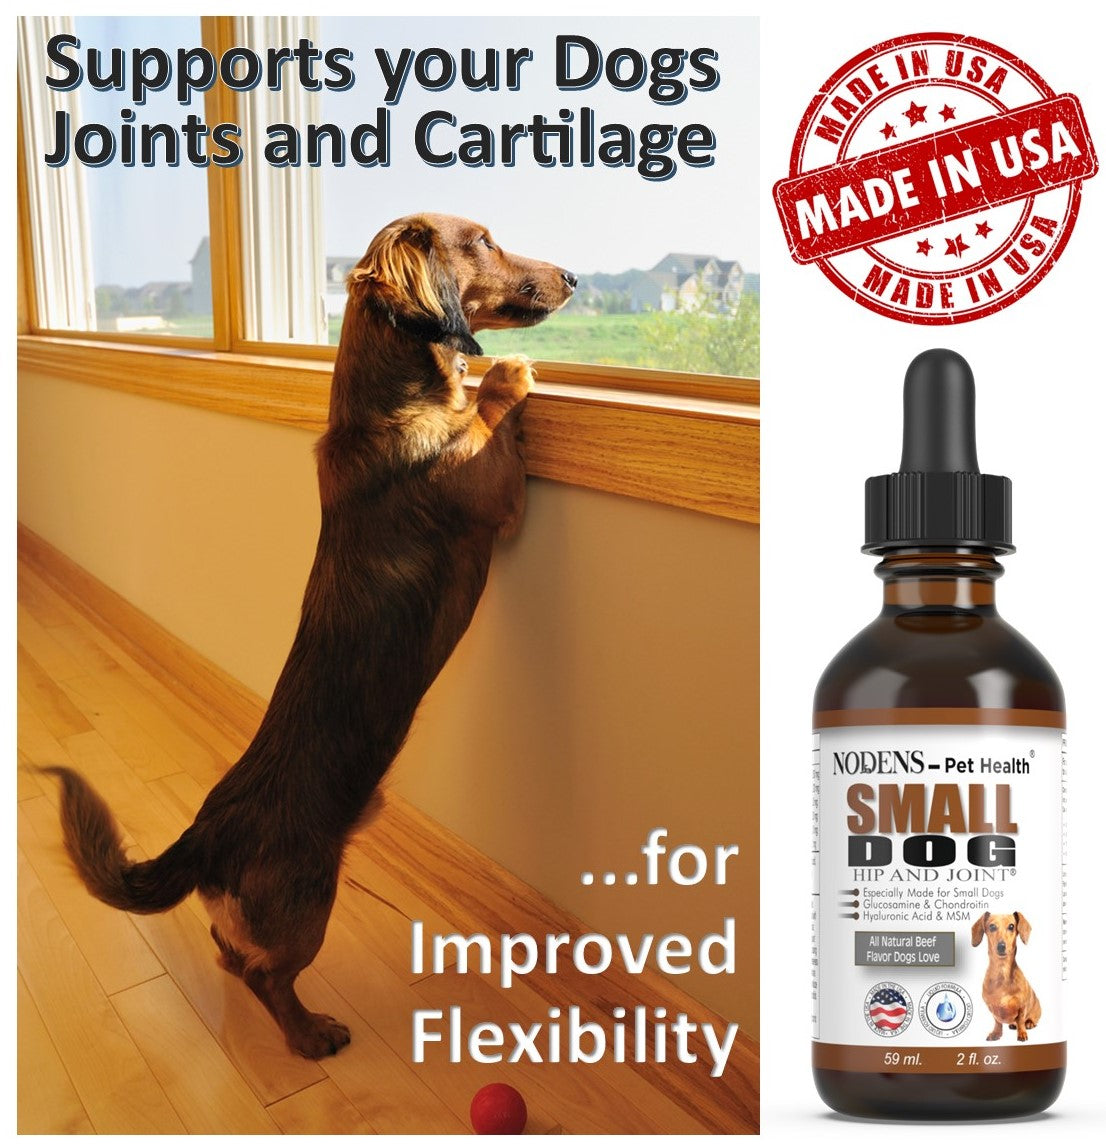 Nodens small dog joint supplements for improved flexibilty